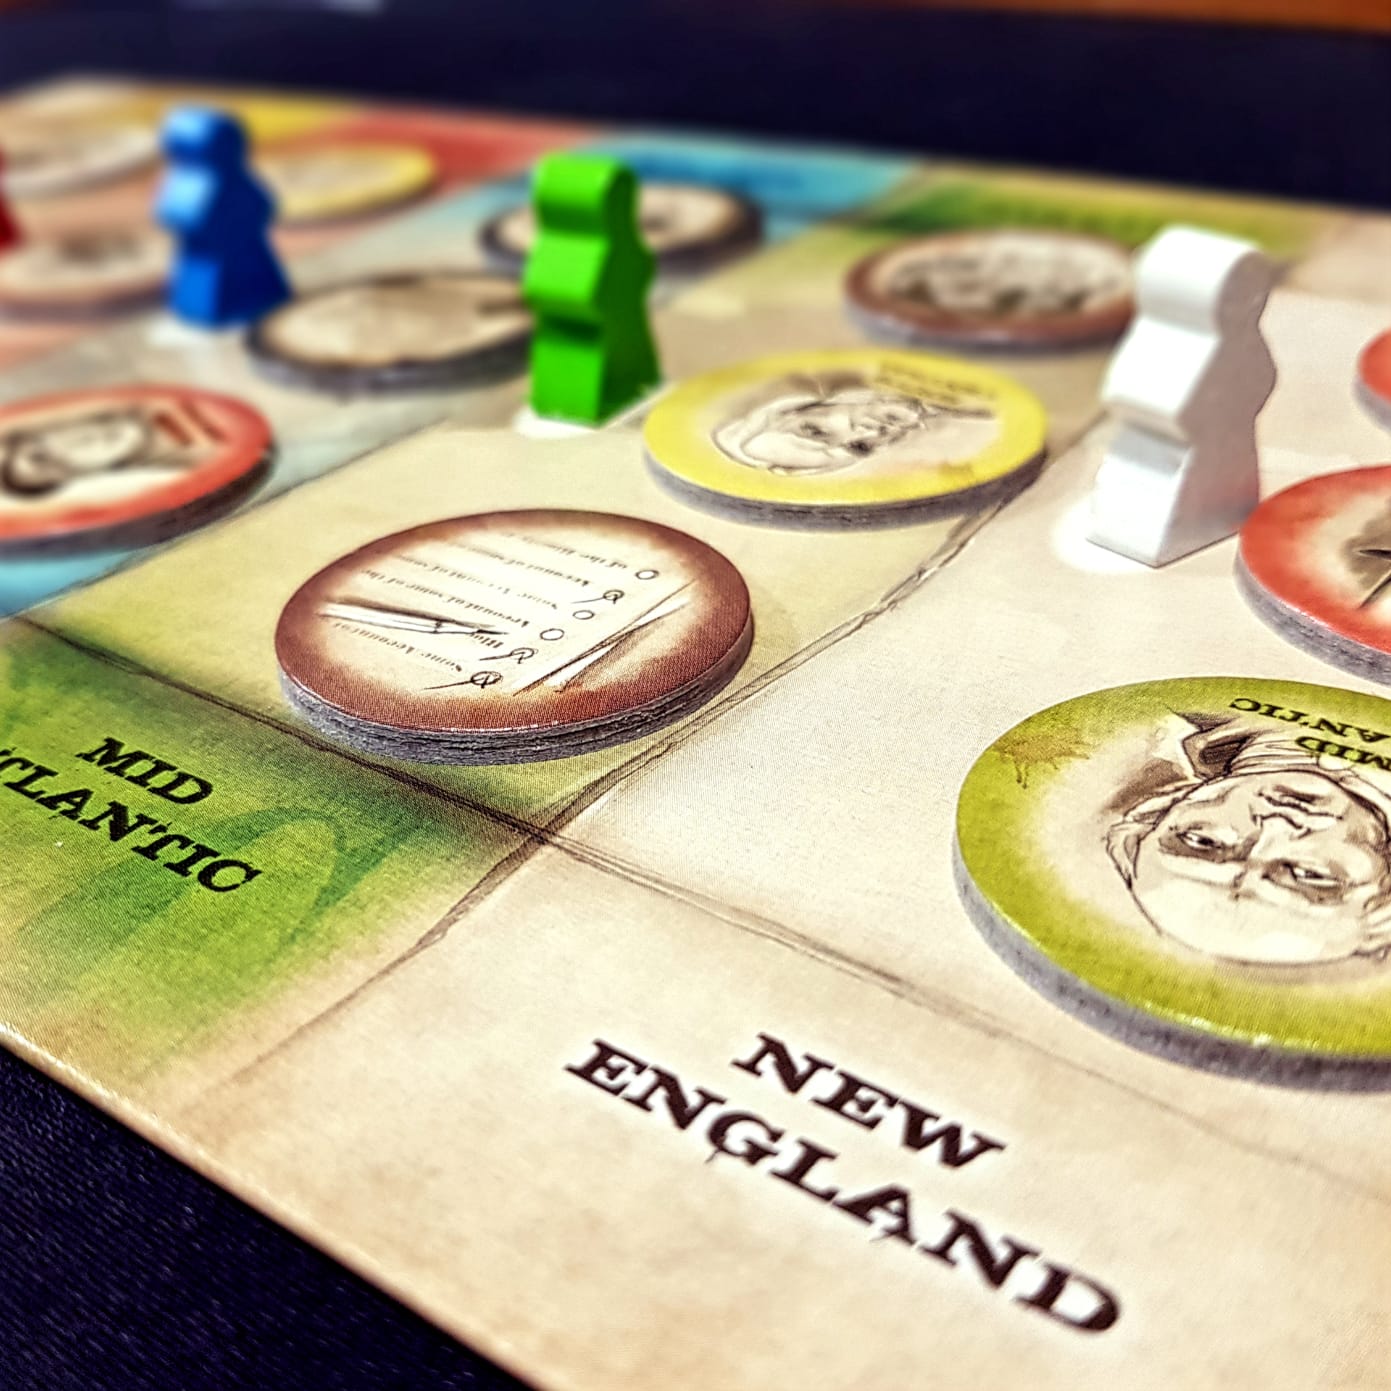 Revolution of 1828 by Renegade Games